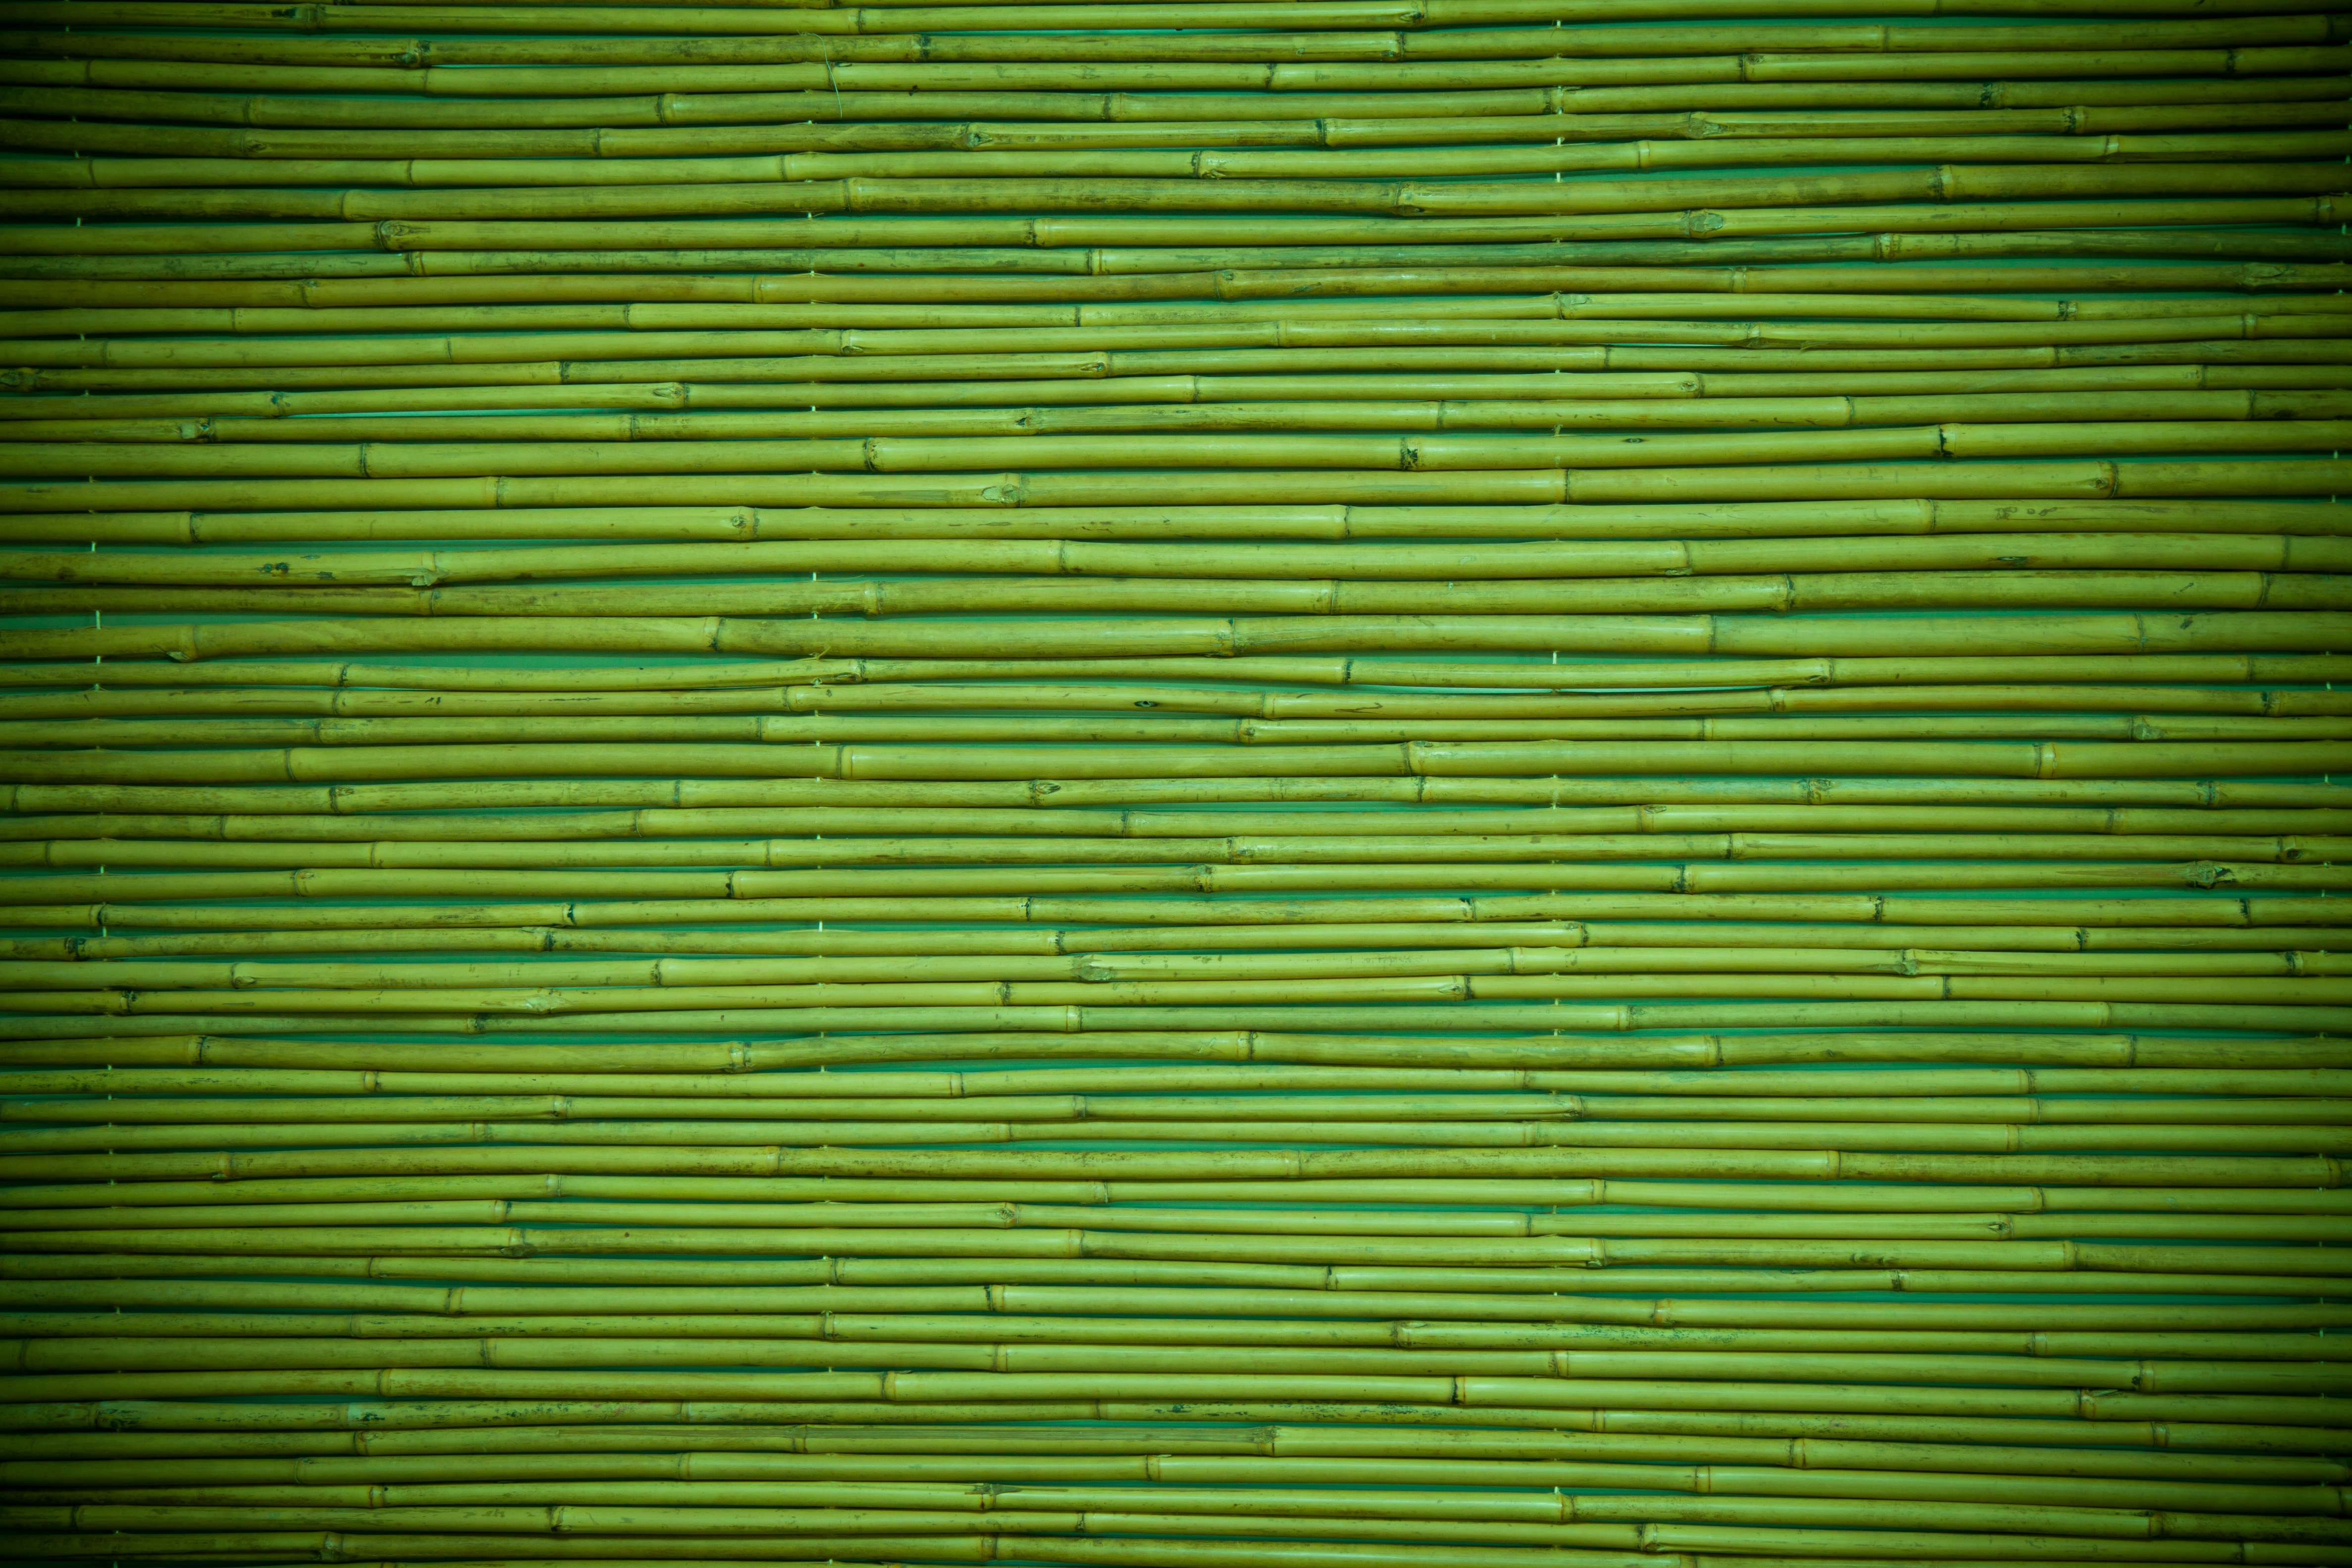 Buy Natural Bamboo Design Green PVC Wallpaper with Emboss Finish by Konark  Decor Online - Natural & Floral Wallpapers - Wallpapers - Furnishings -  Pepperfry Product